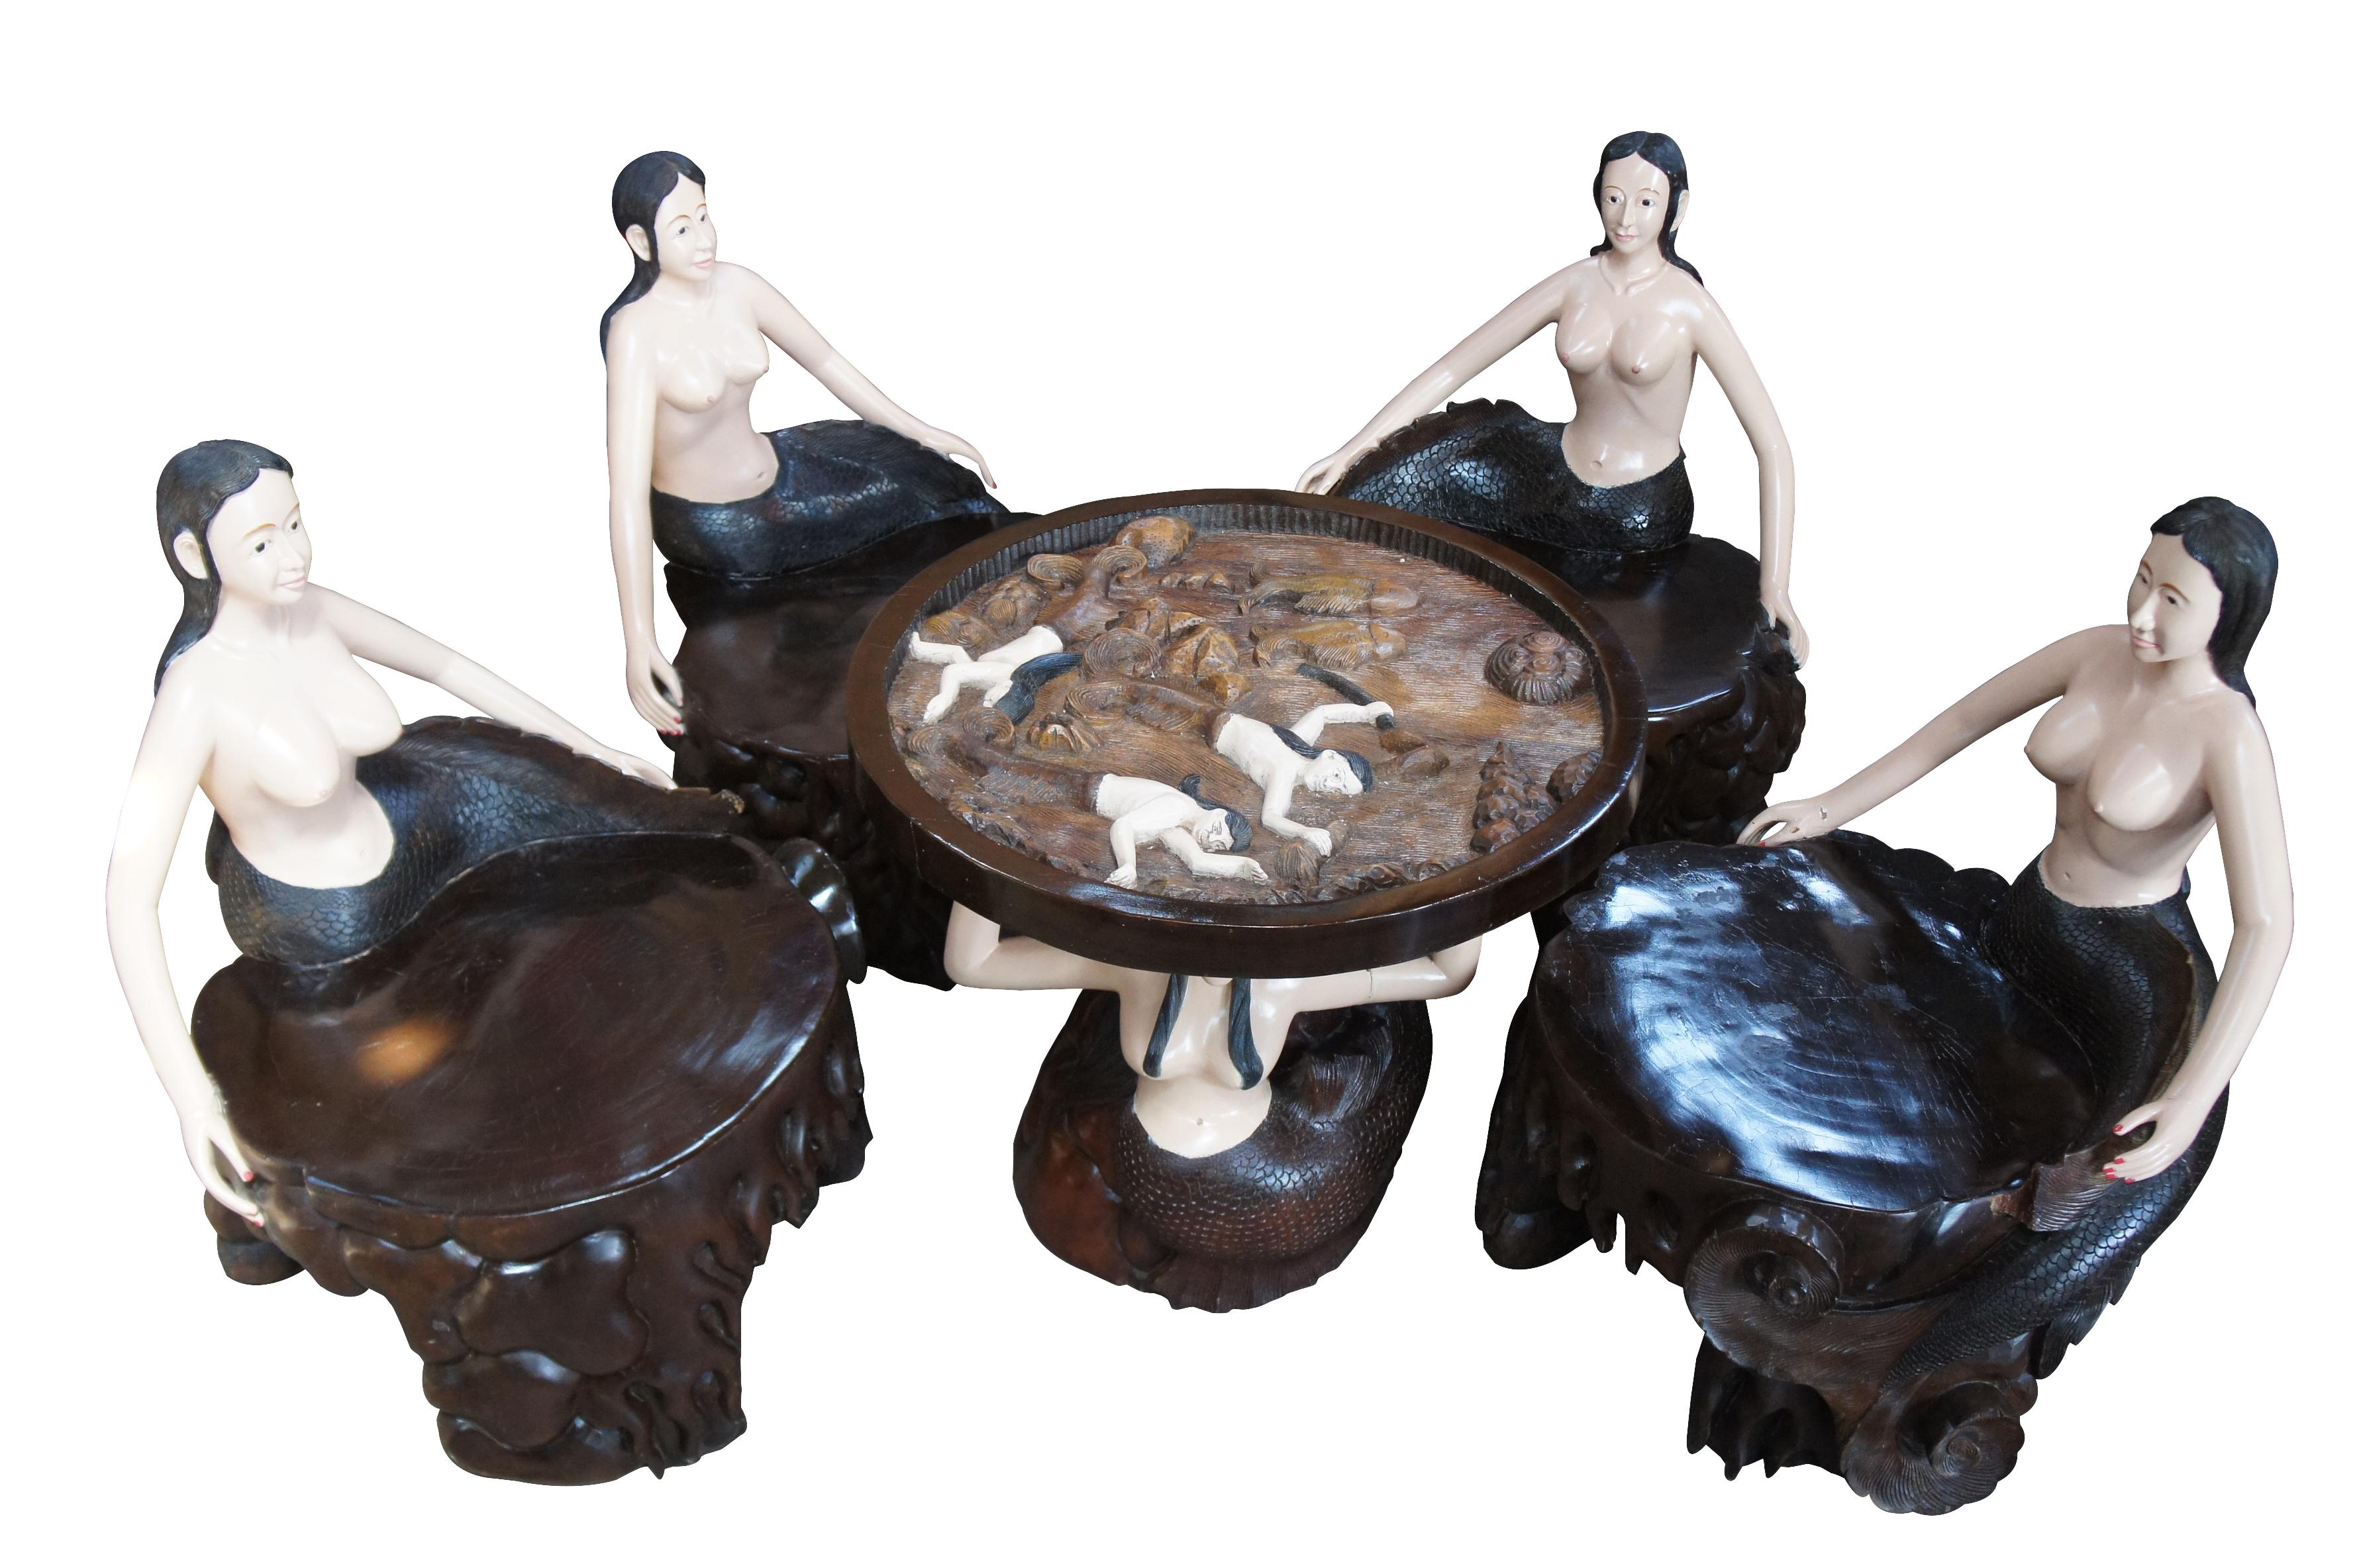 Vintage carved nude figural mermaid card game table and chairs nautical poker bali

Up for consideration is a handcrafted mermaid card table set from Bali, Indonesia. Features 4 nude mermaid chairs and mermaid table with glass top. Each piece is